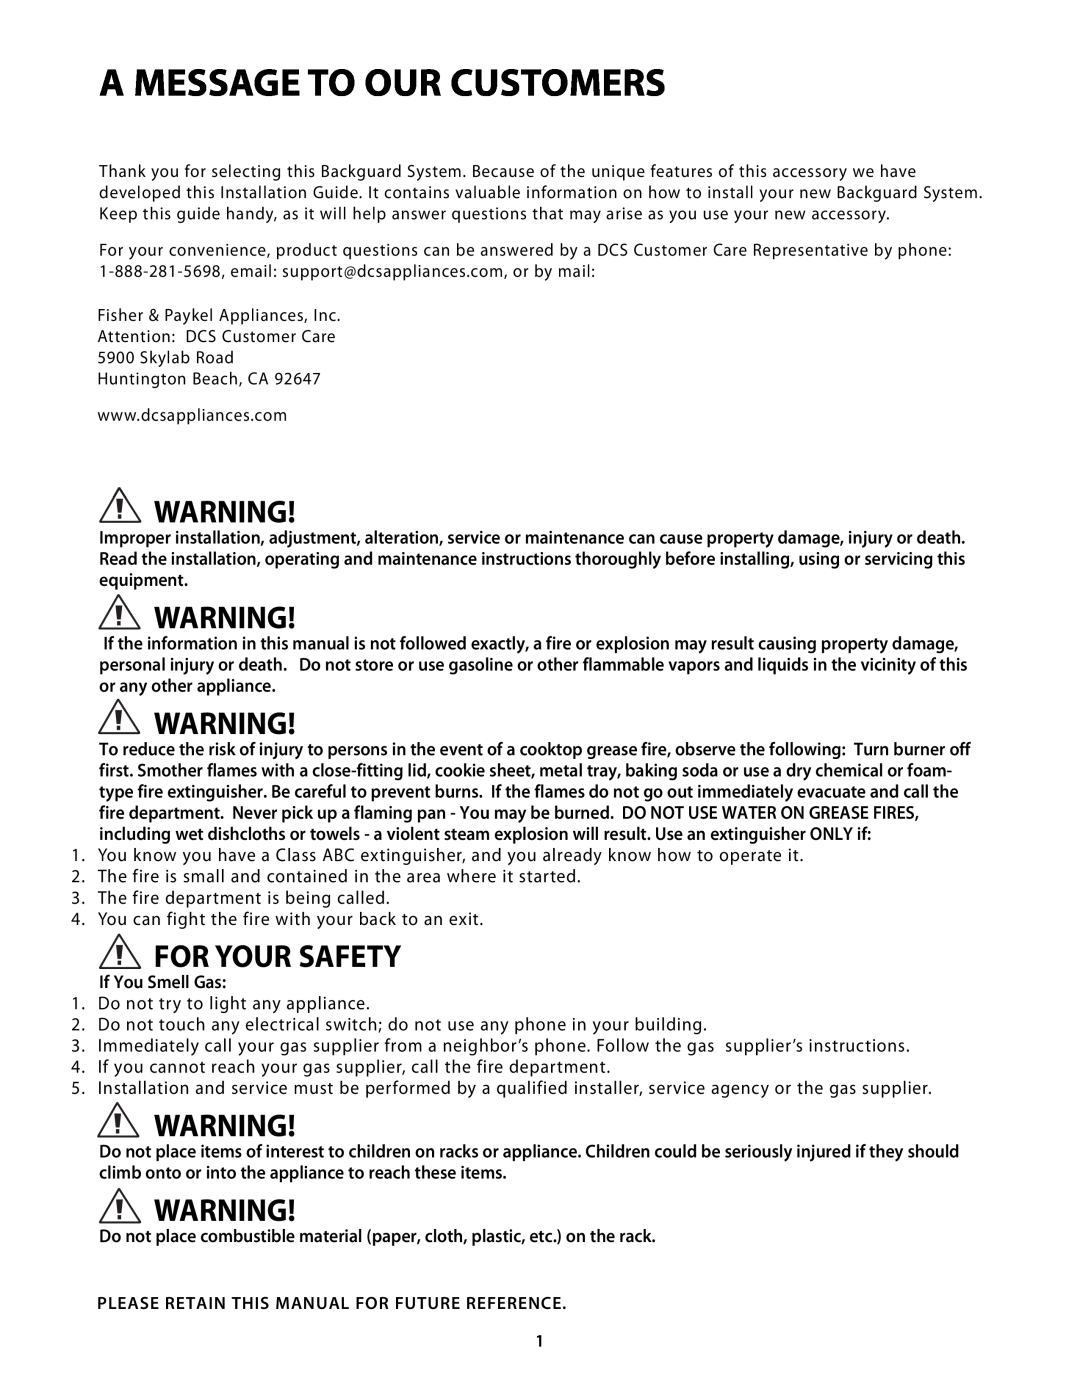 DCS BGC-1248, BGC-3048, BGC-1236, BGC-3036 manual A Message To Our Customers, For Your Safety, If You Smell Gas 